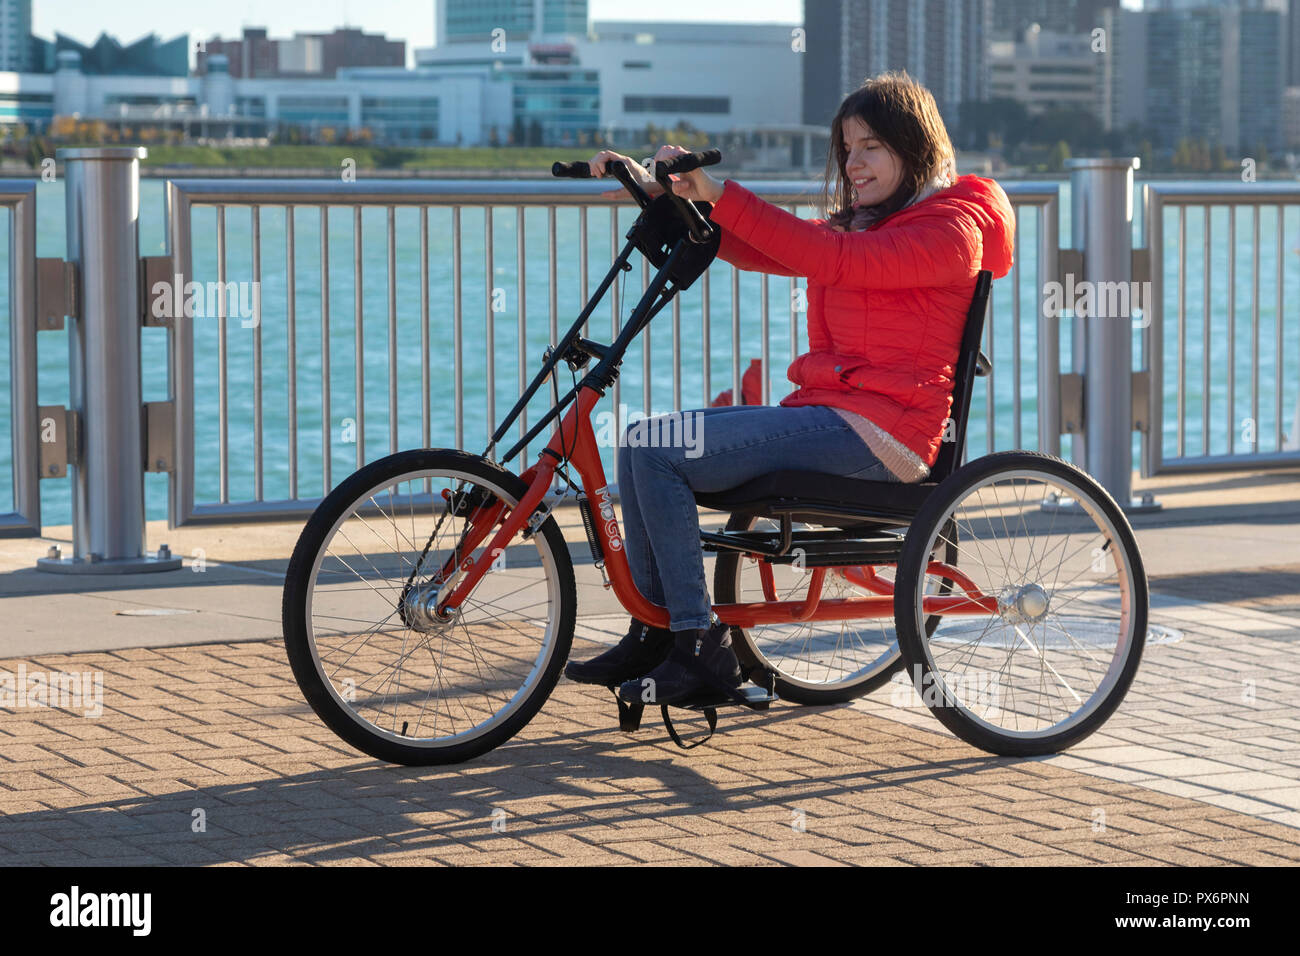 Detroit, Michigan - People try out adaptive bicycles, now offered through MoGo, Detroit's bike share system. The adaptive bikes are designed for peopl Stock Photo